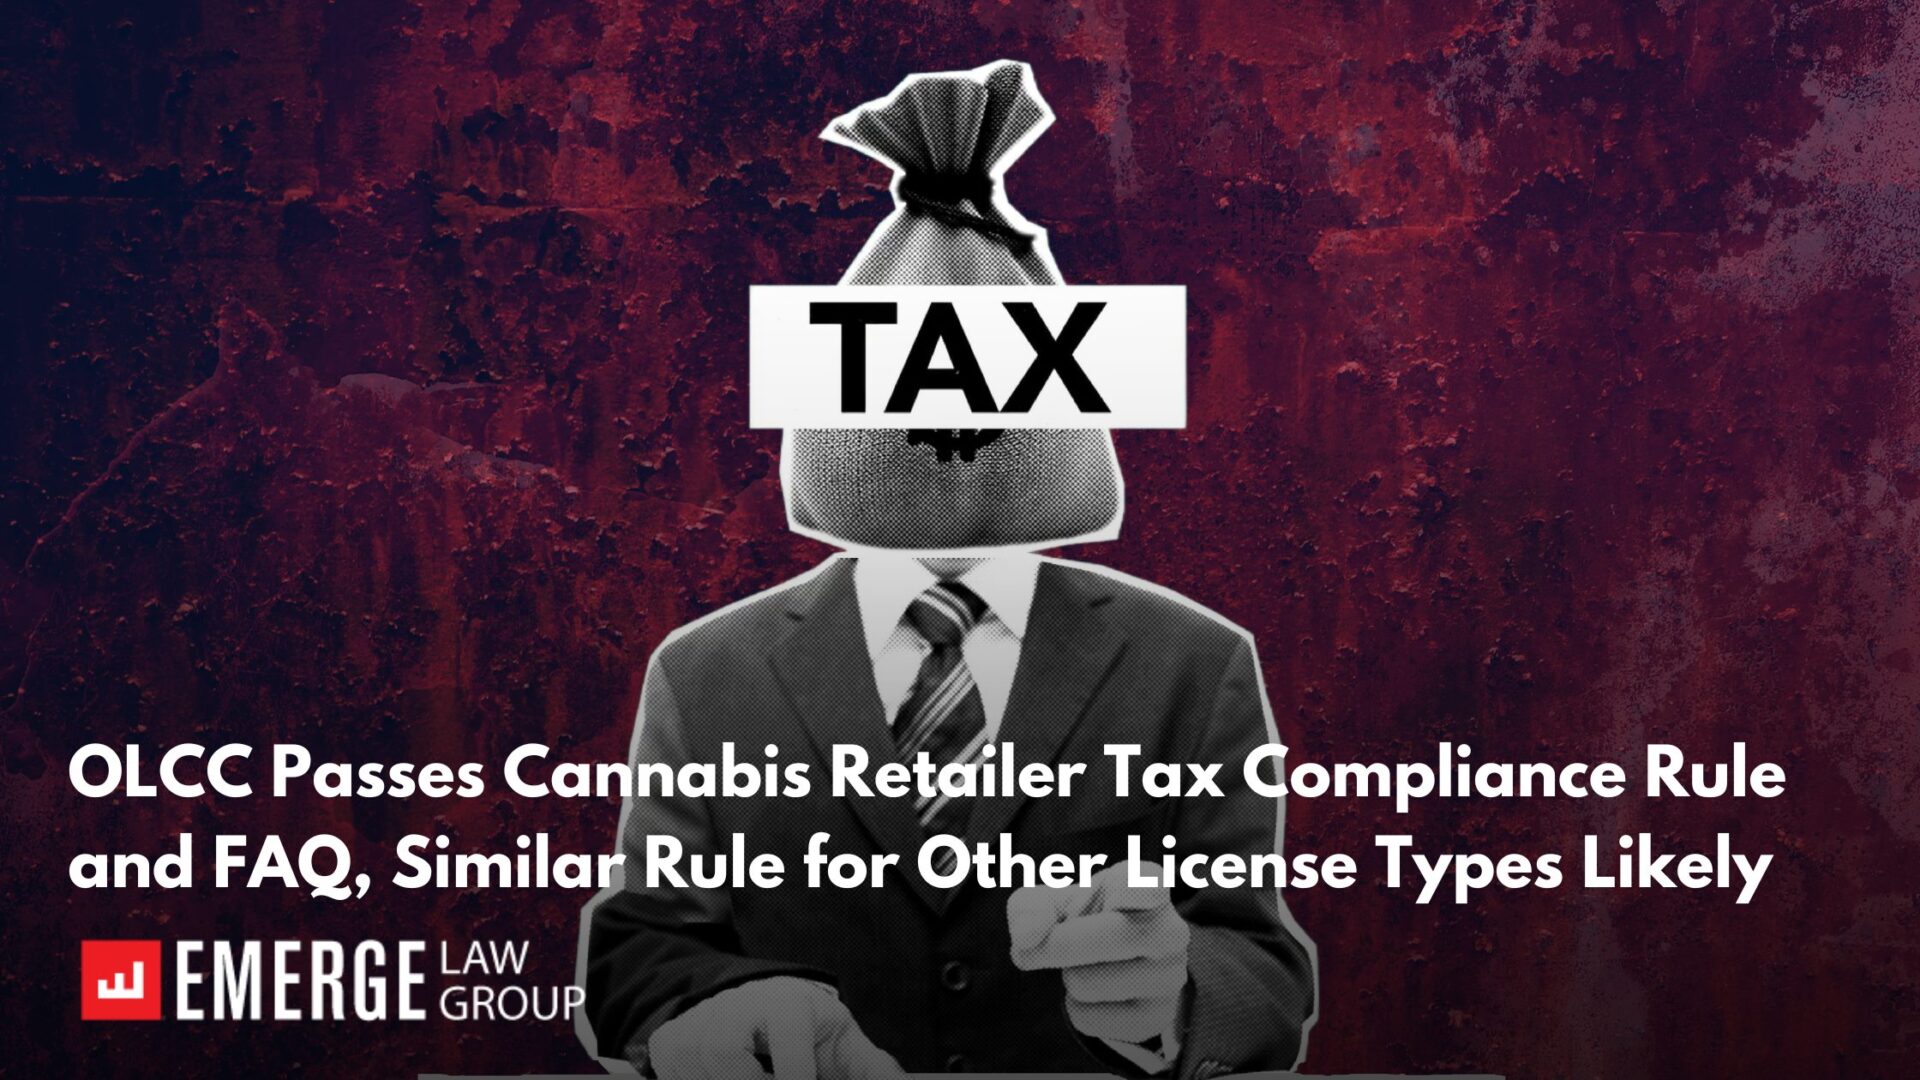 OLCC Passes Cannabis Retailer Tax Compliance Rule and FAQ, Similar Rule for Other License Types Likely